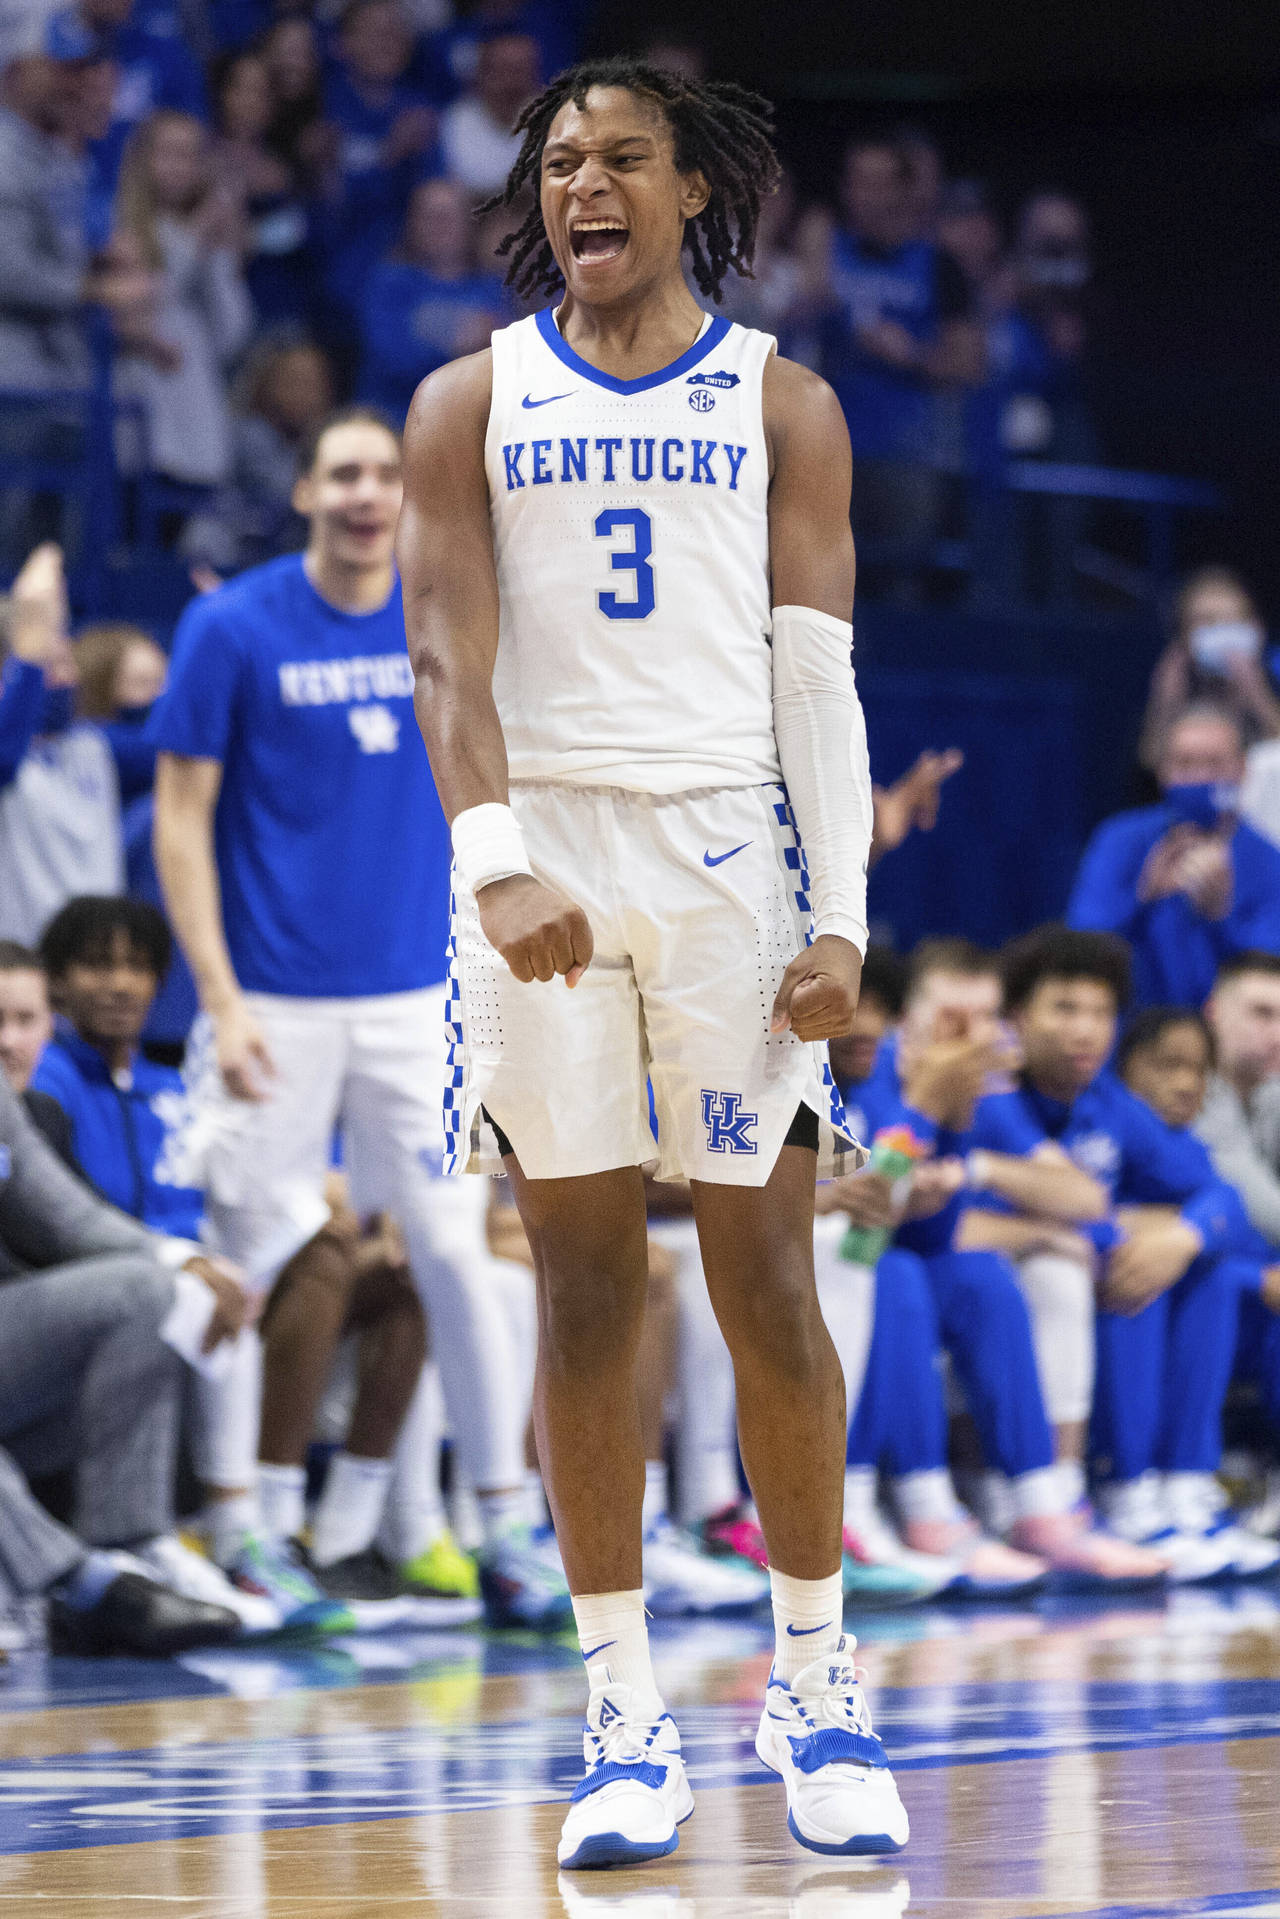 TyTy Washington injured again in Kentucky-Tennessee game